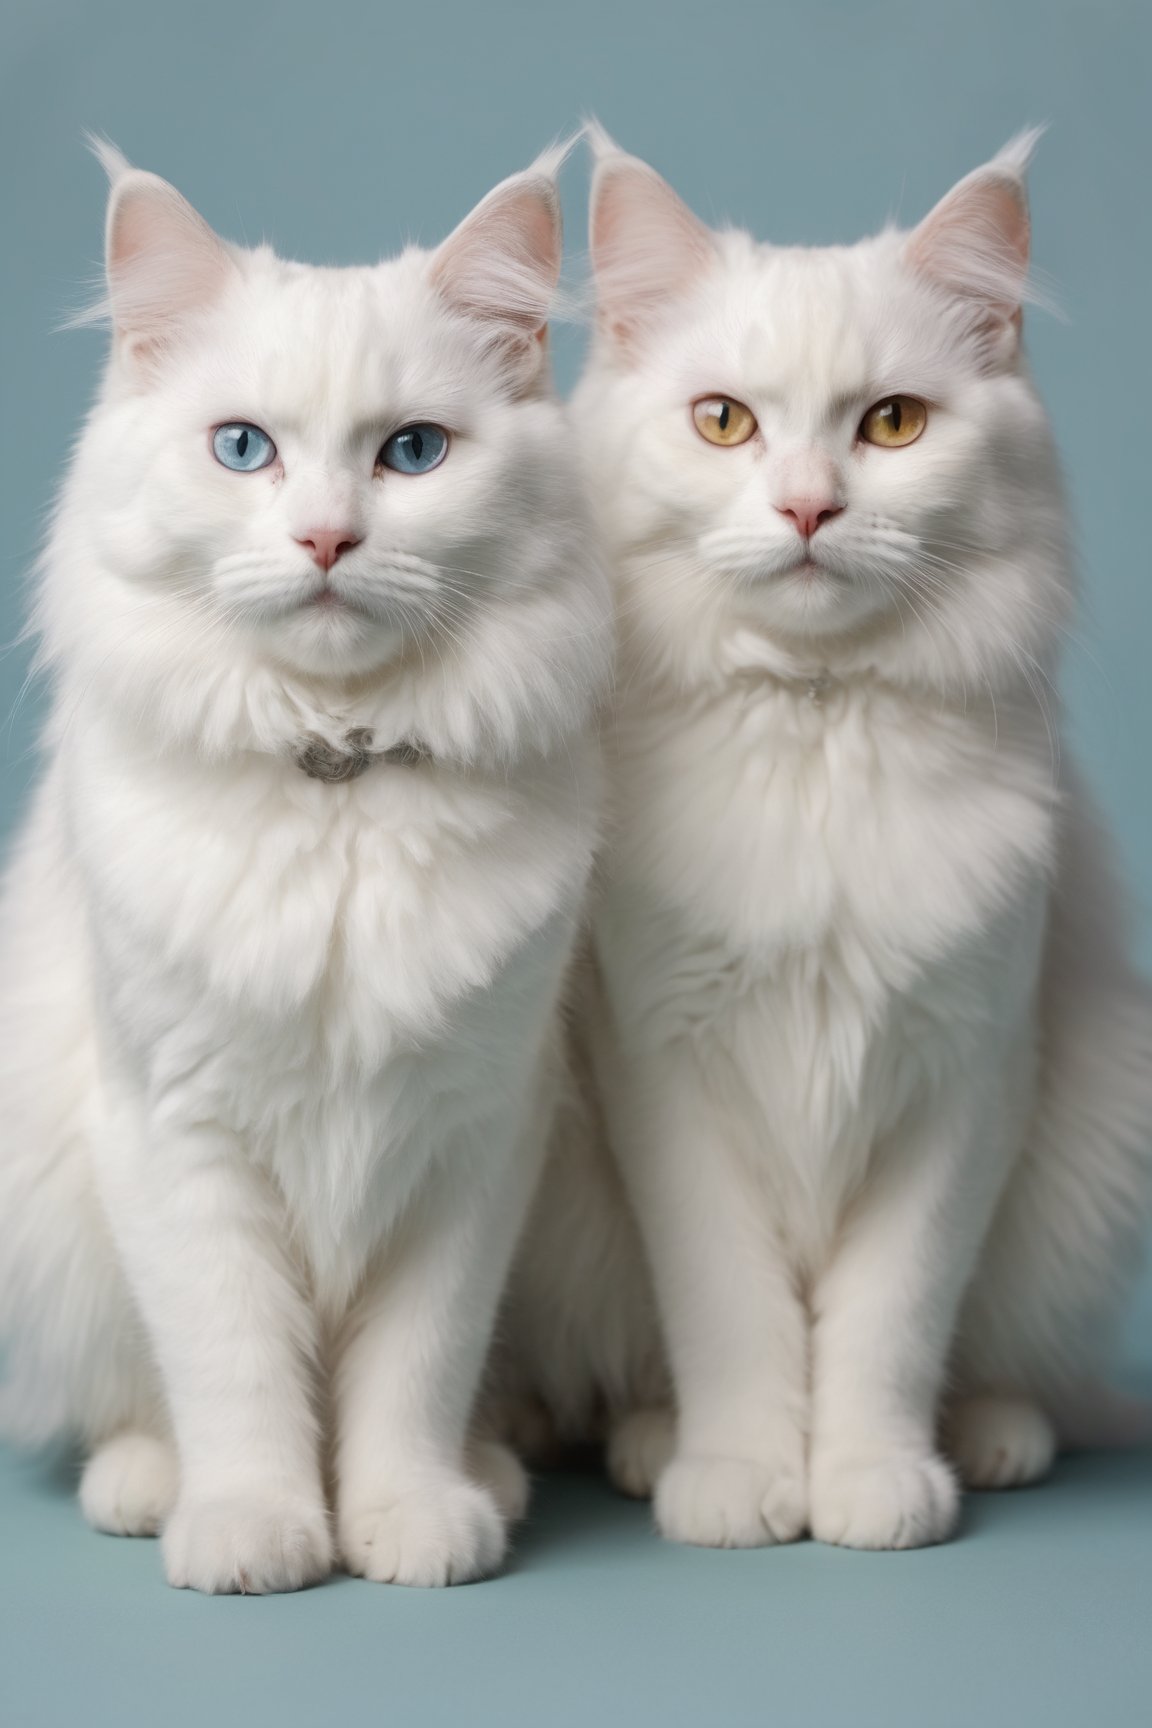 Two fluffy snow-white cats, they have two pupils of different colors, their eyes are clear and full of details